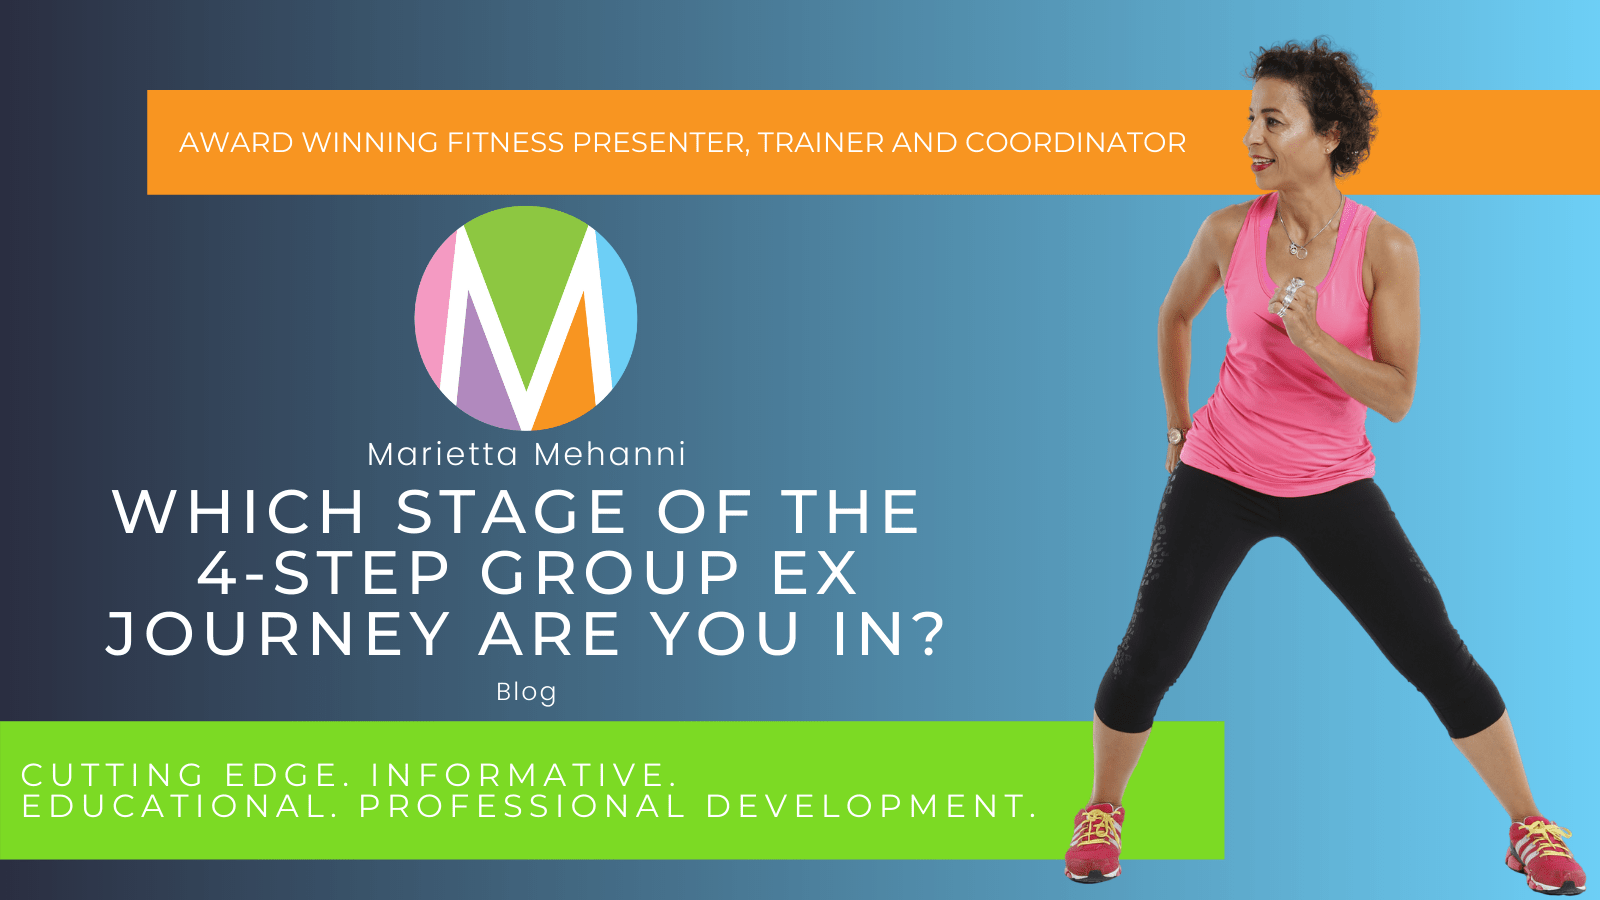 blog which stage of the 4 step group ex journey are you in marietta mehanni education professional development group fitness personal training informative fitness guru presenter